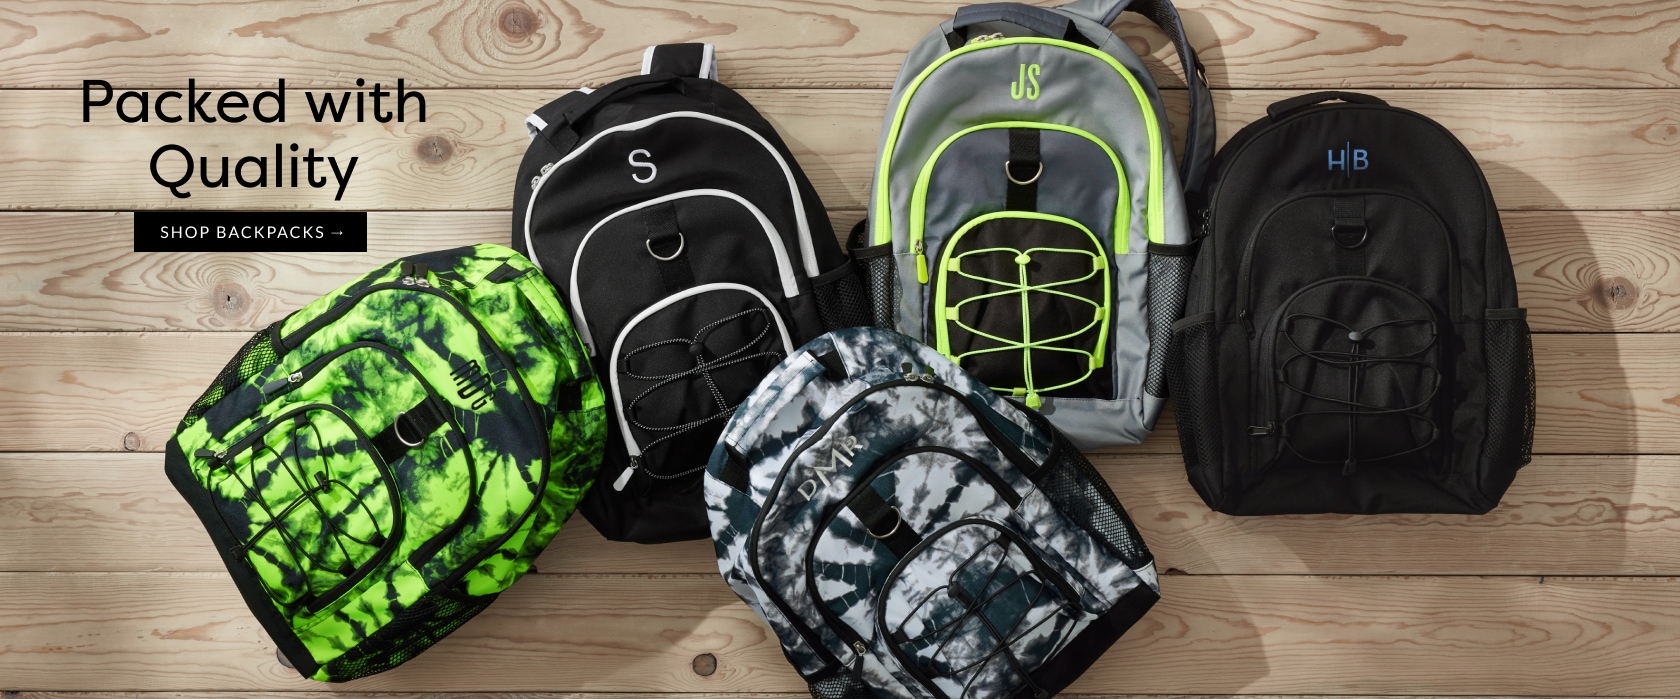 Packed with Quality > Shop Backpacks